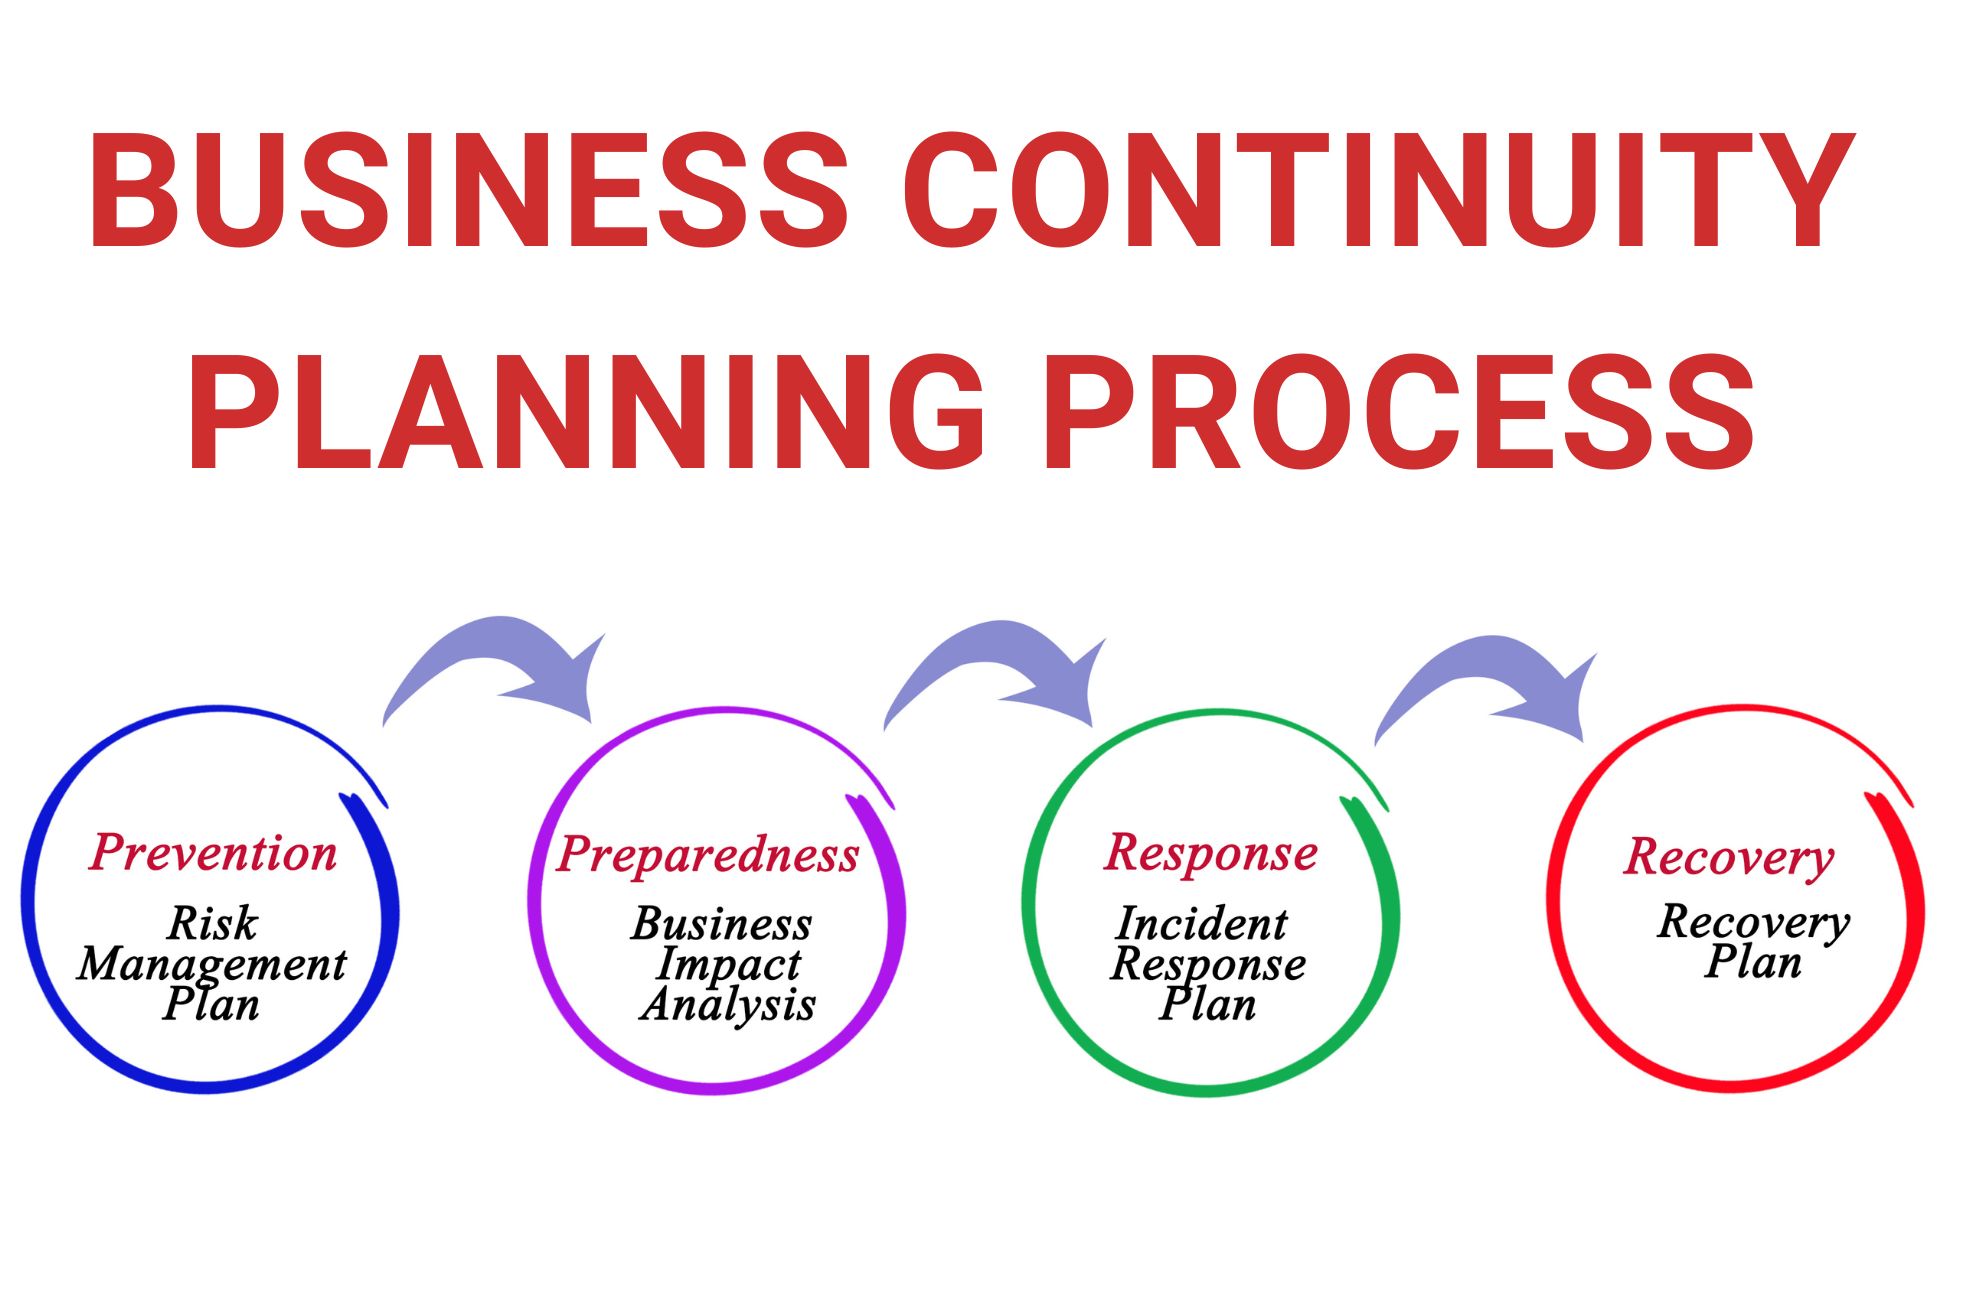 Business Continuity Planning Process